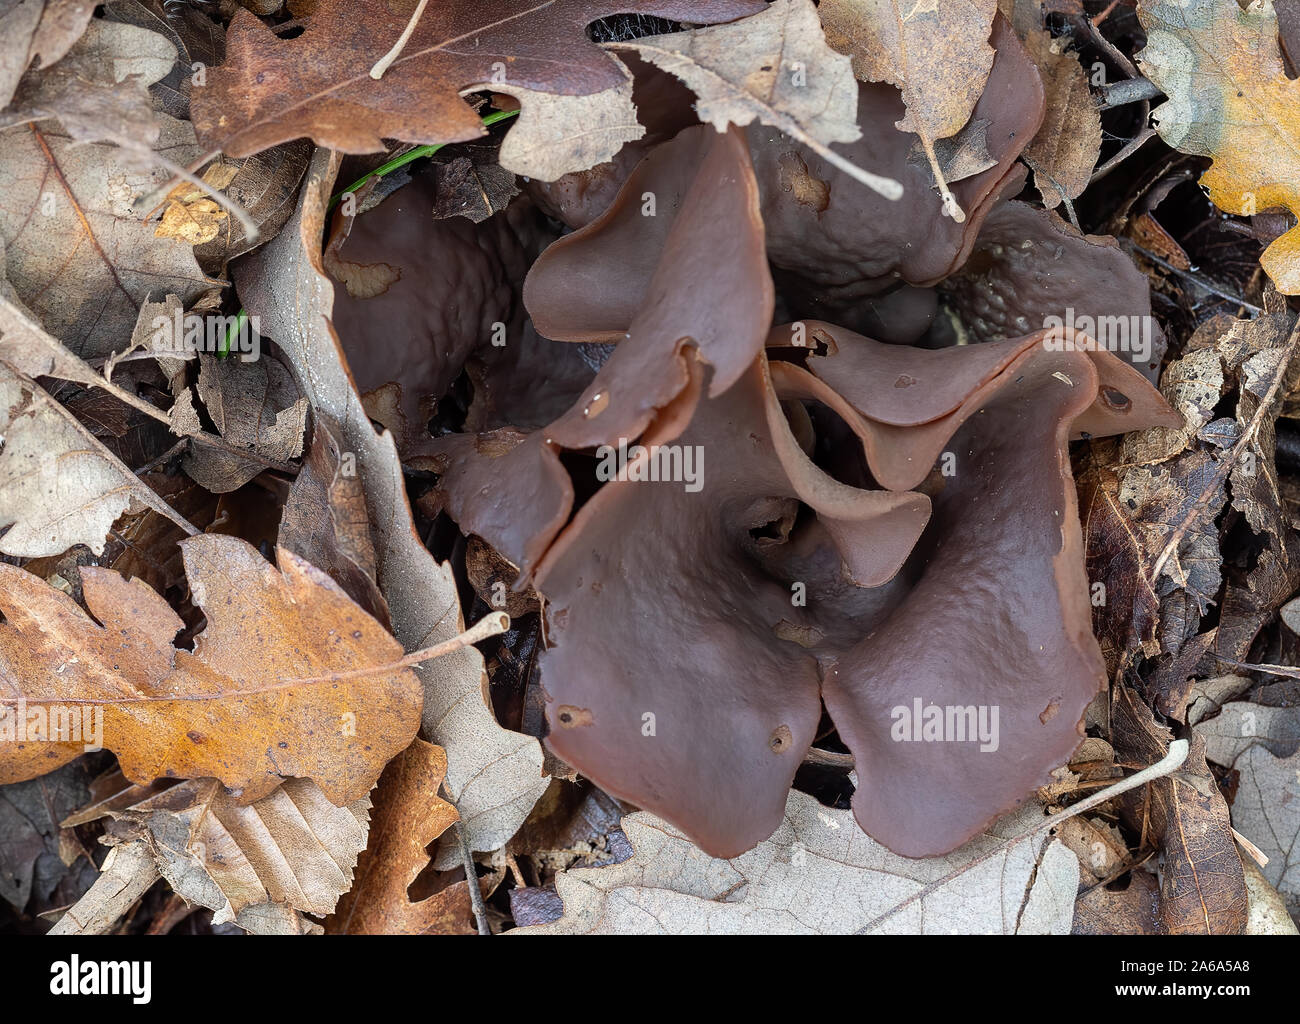 Peziza badia mushroom fungus. Aka Bay cup. Leathery brown, if you touch it gently a vast amount of spores fly out. Stock Photo